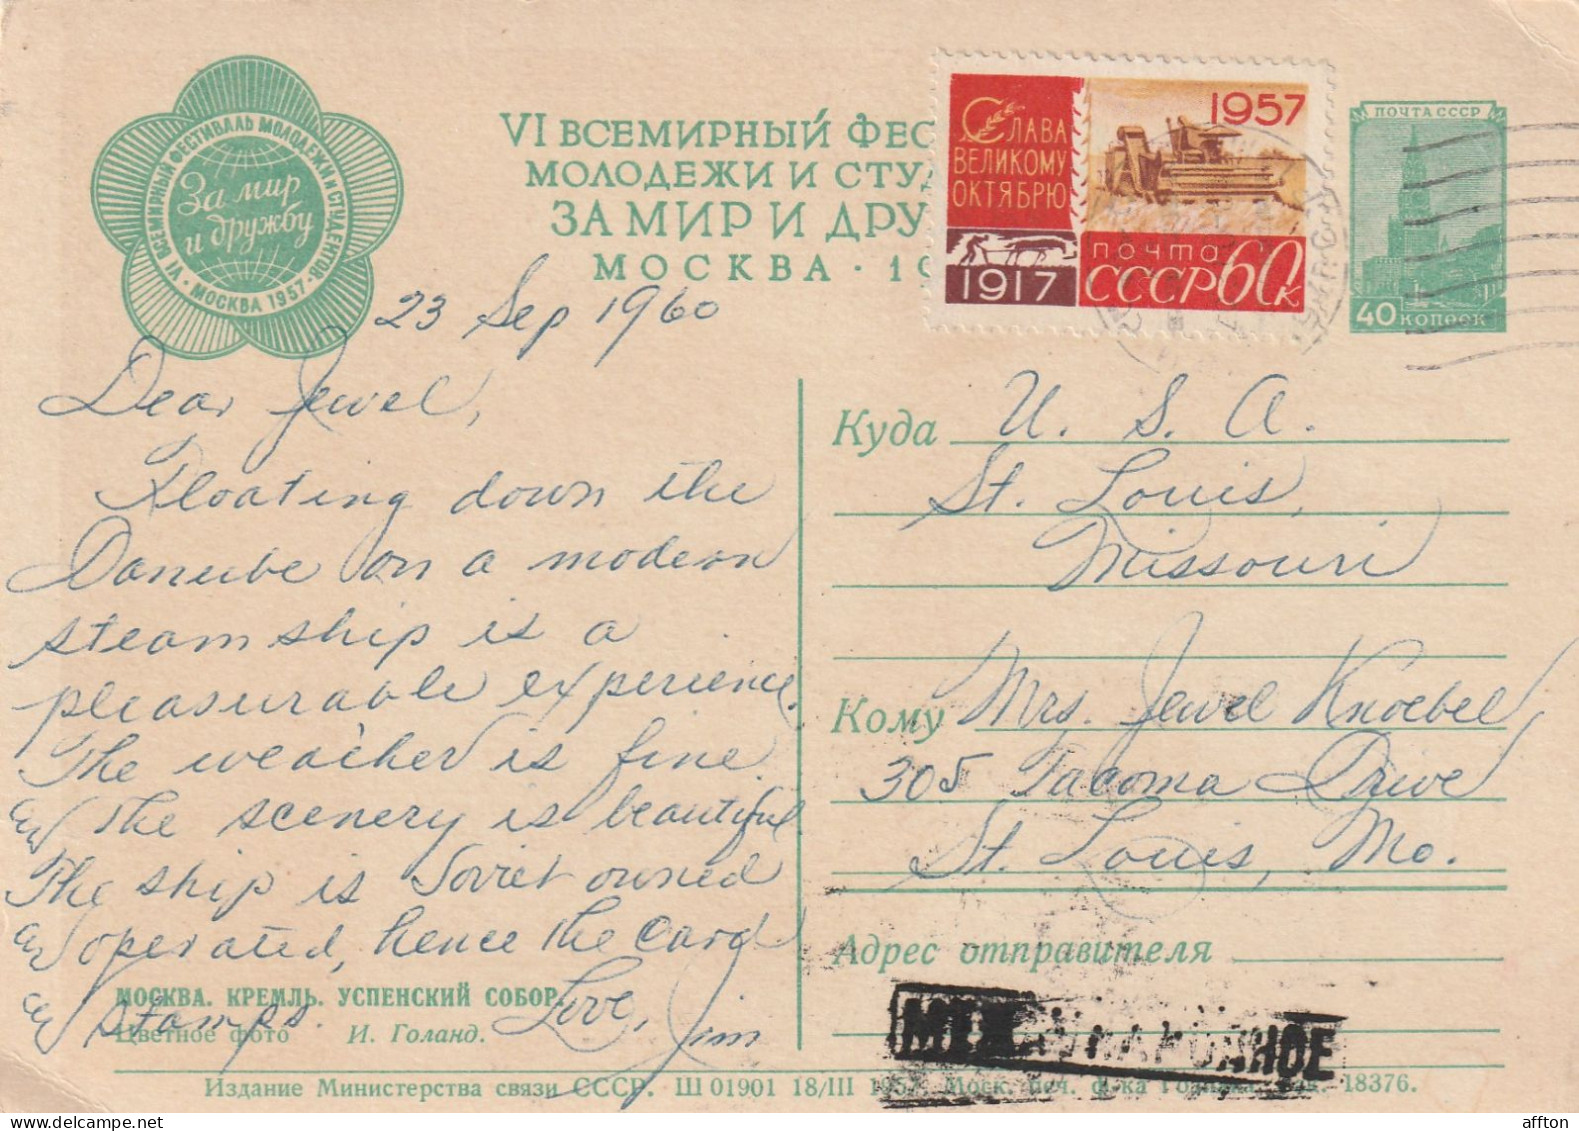 Russia 1960 Card Mailed To USA - Covers & Documents